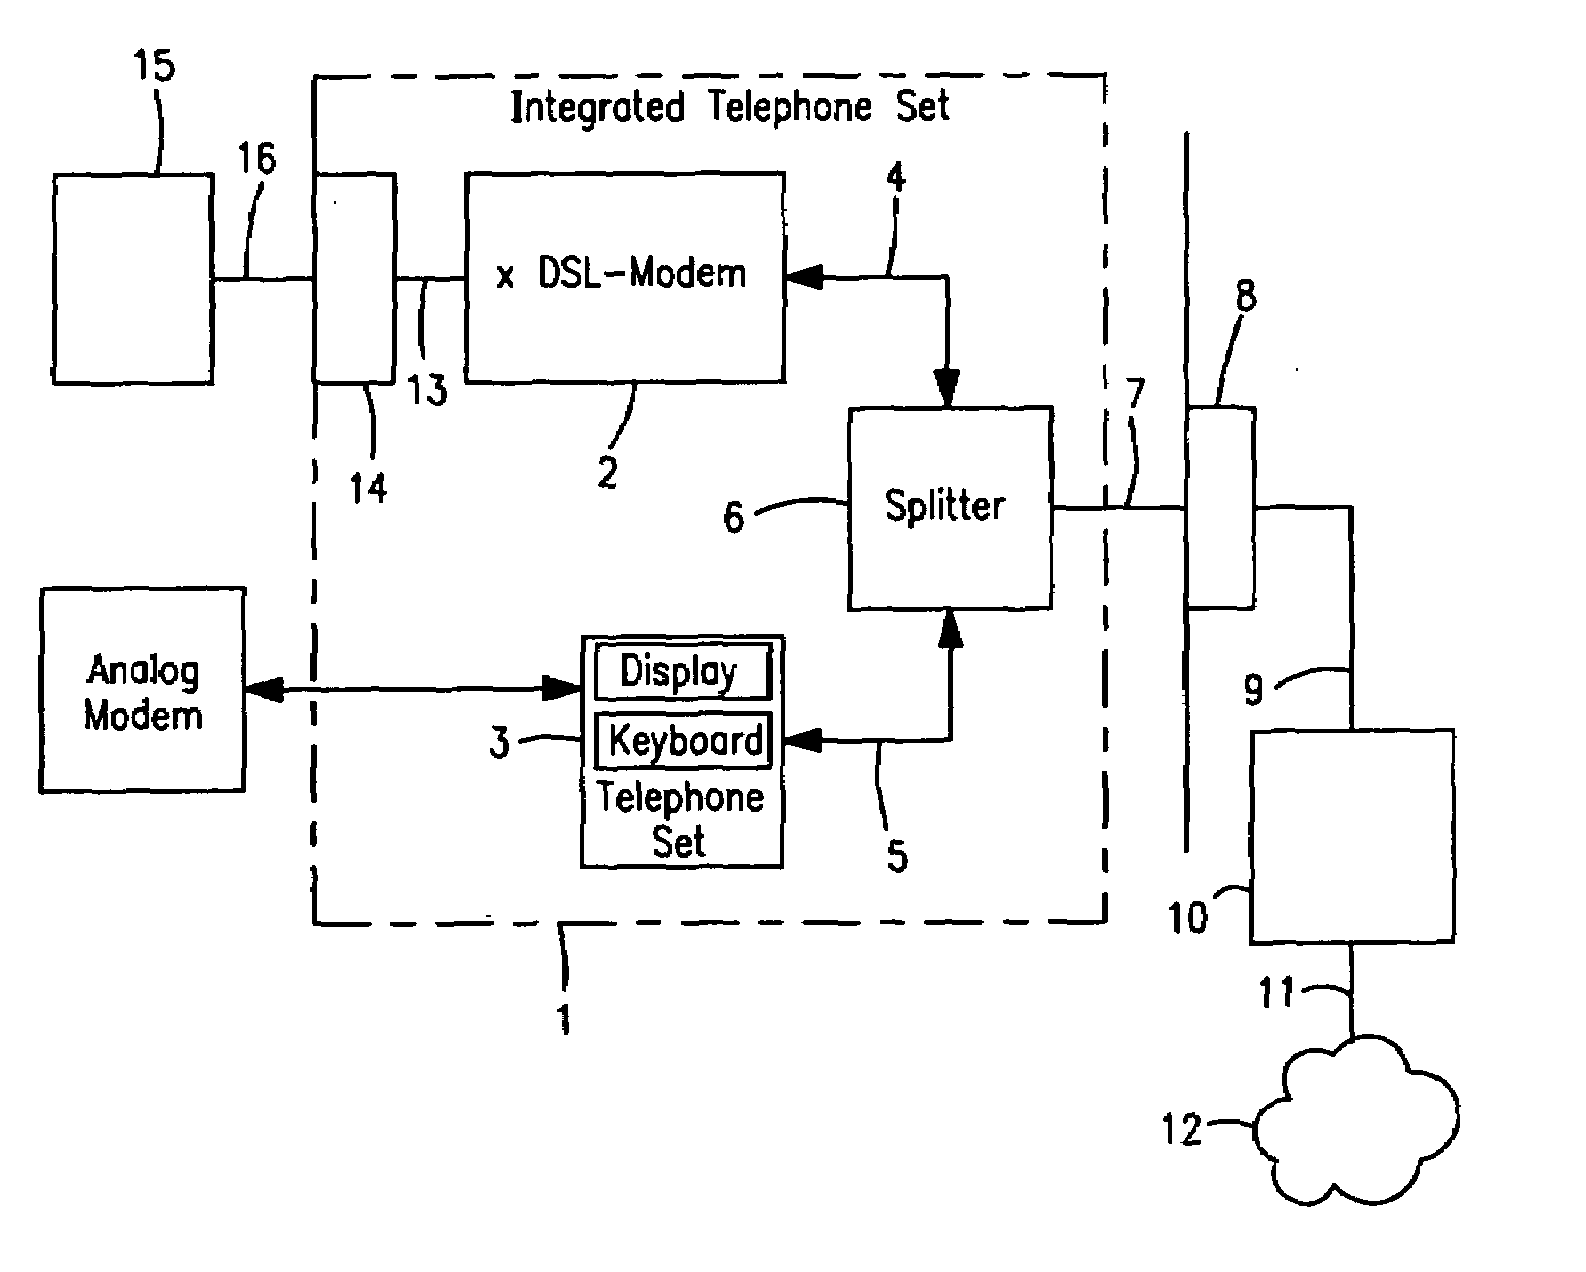 Integrated telephone set with an xDSL-modem